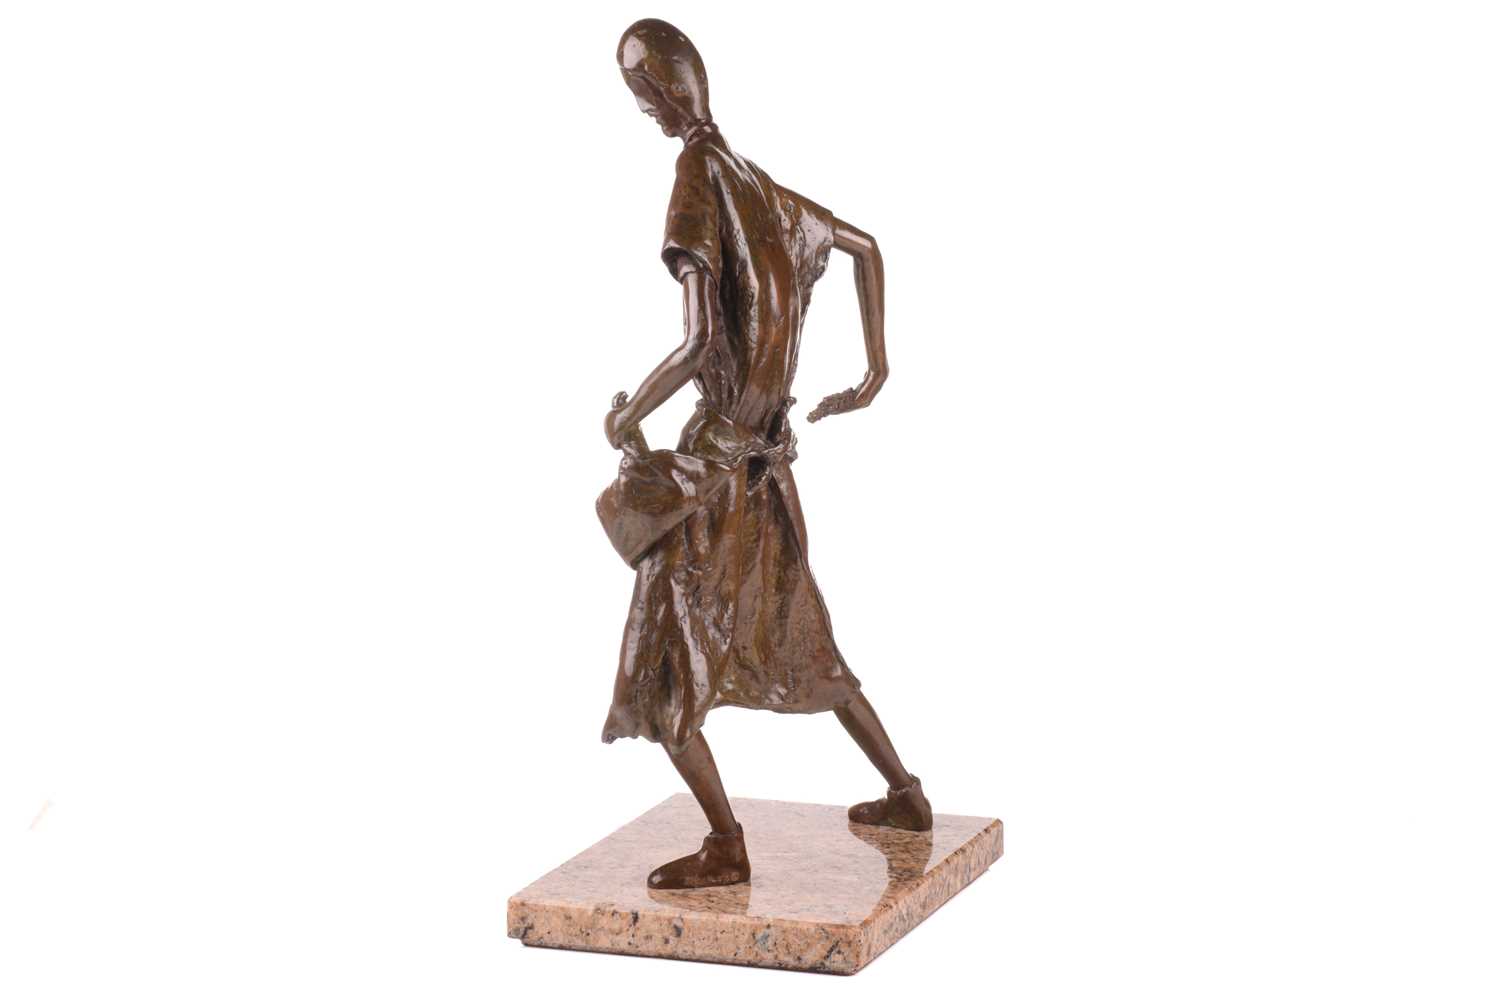 Late 20th century British School, The Sower, indistinctly signed, numbered 7/7, bronze figure on a m - Image 4 of 6